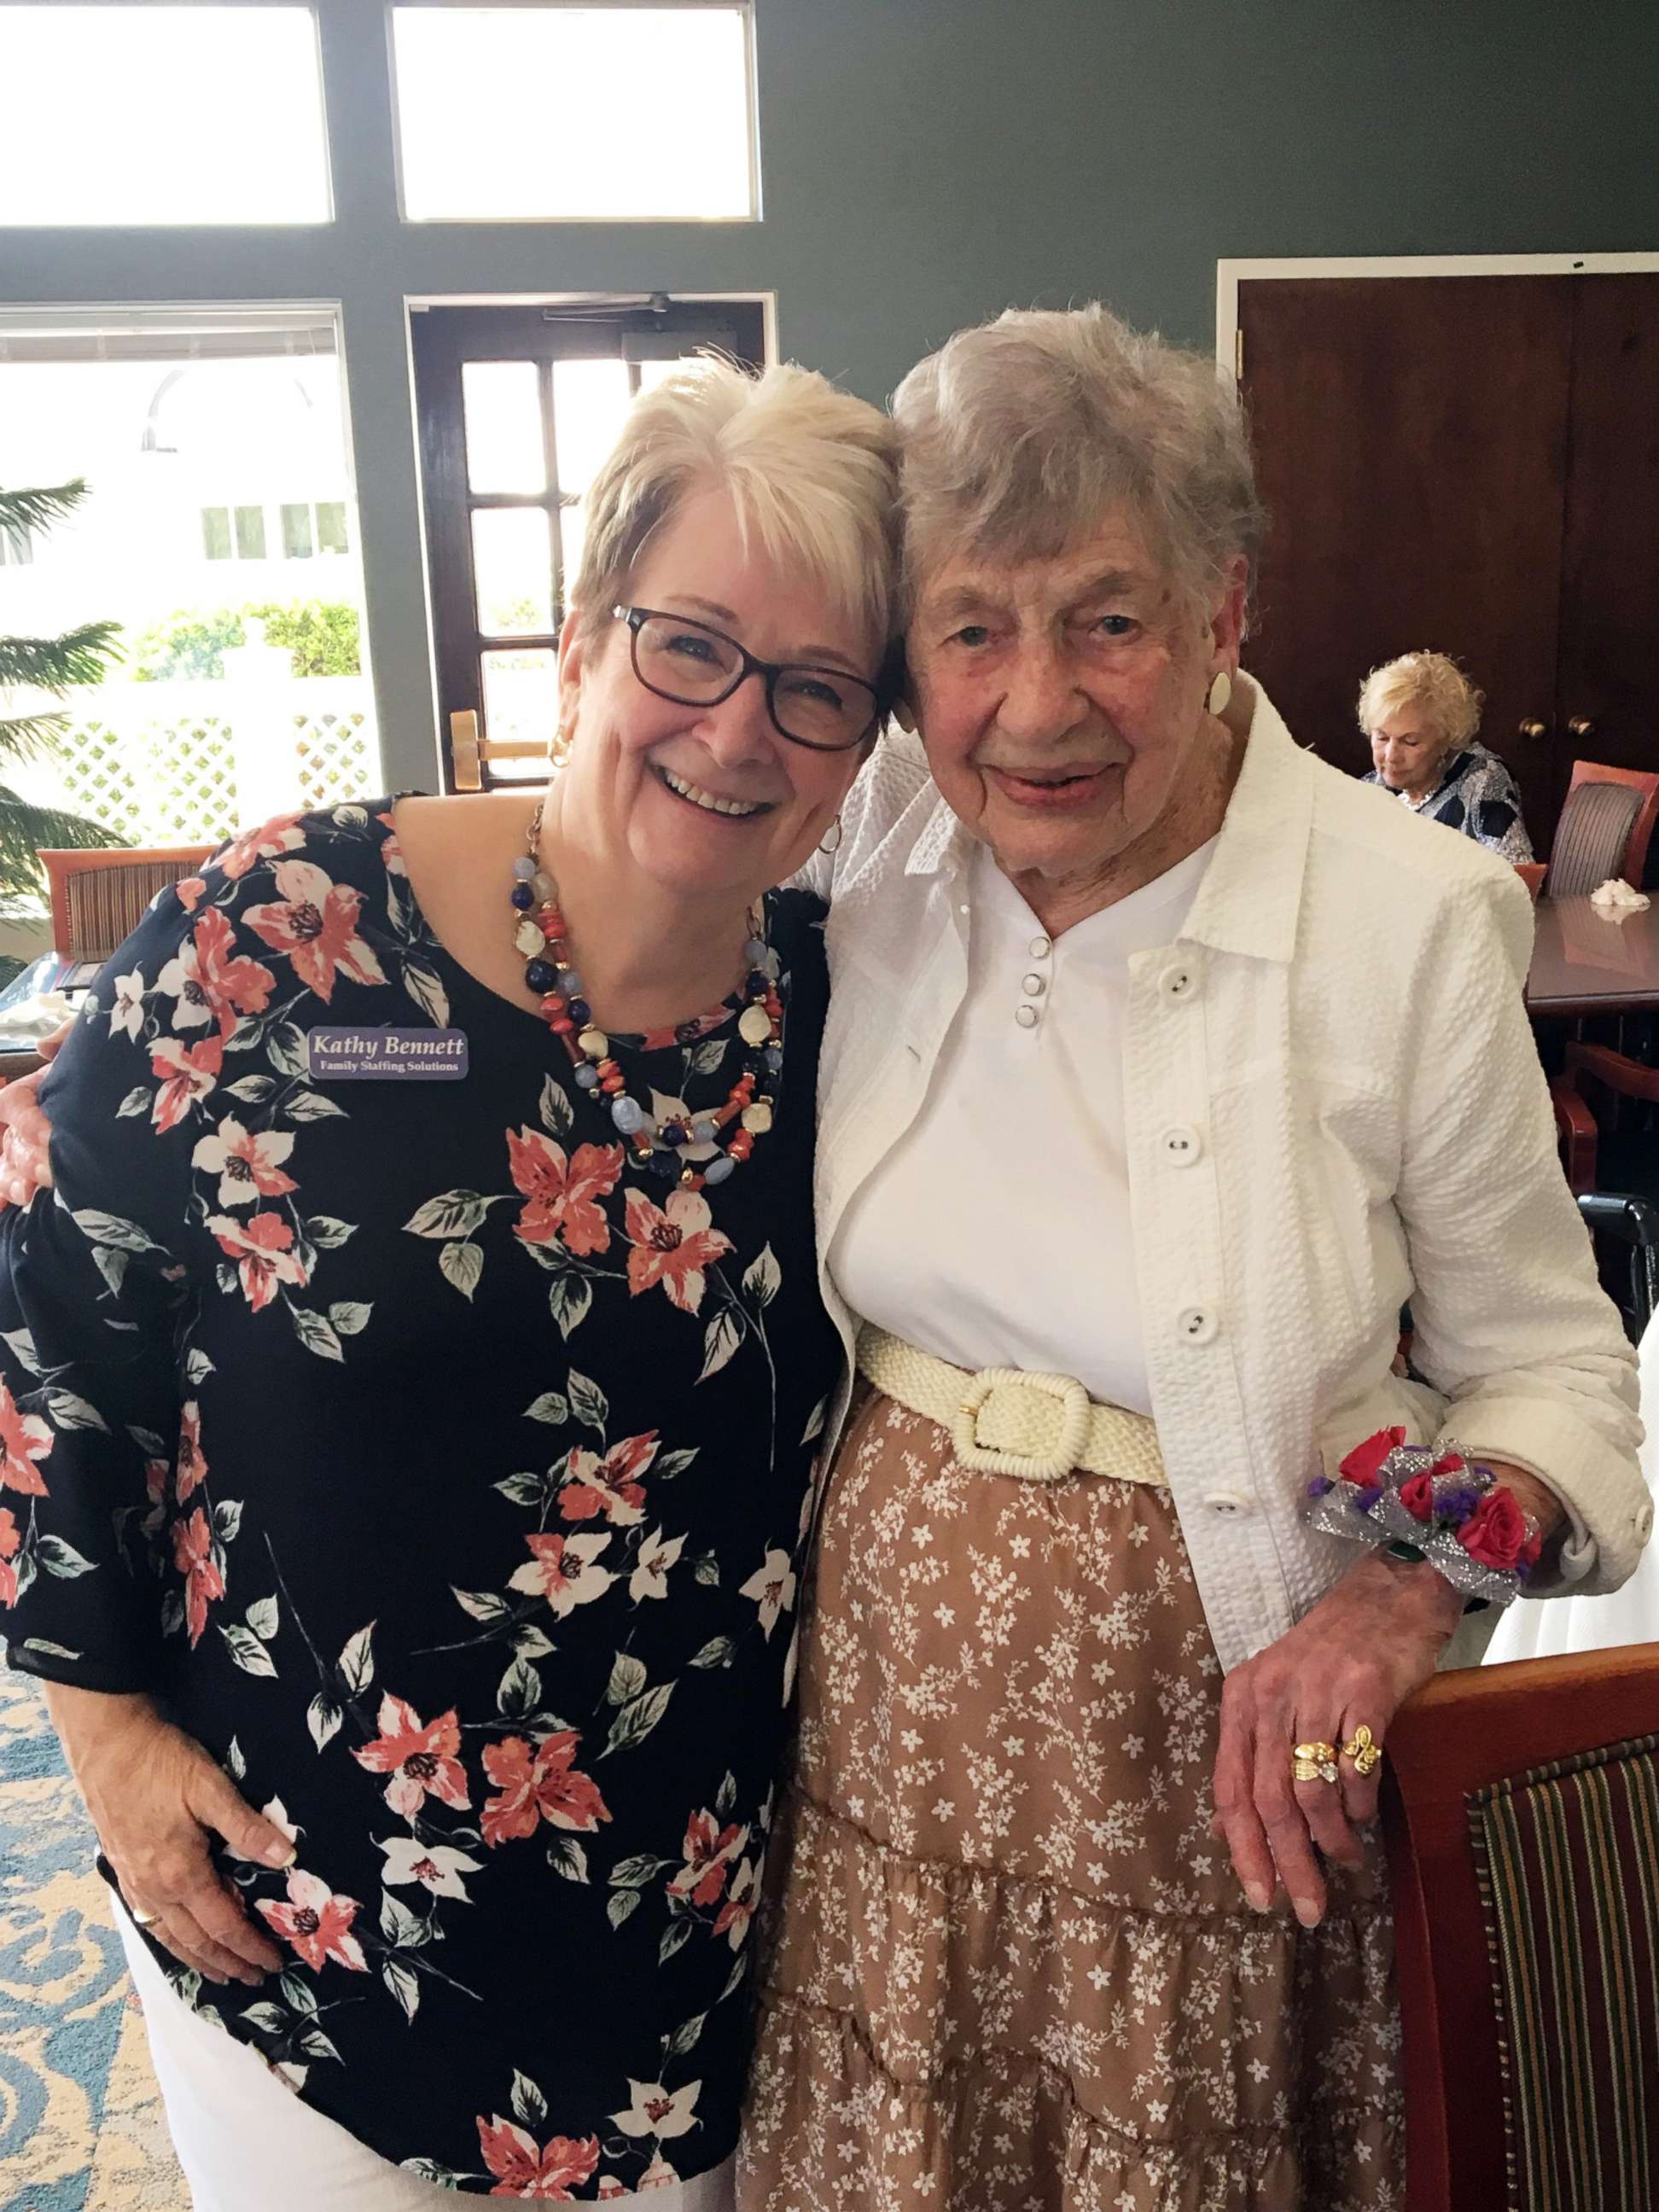 PHOTO: Kathy Bennett of Family Staffing Solutions poses for a photo with Marion L. Lyon, 104, during a celebration at the Meadows Lakeshore Senior Living in Nashville, Aug. 15, 2019.